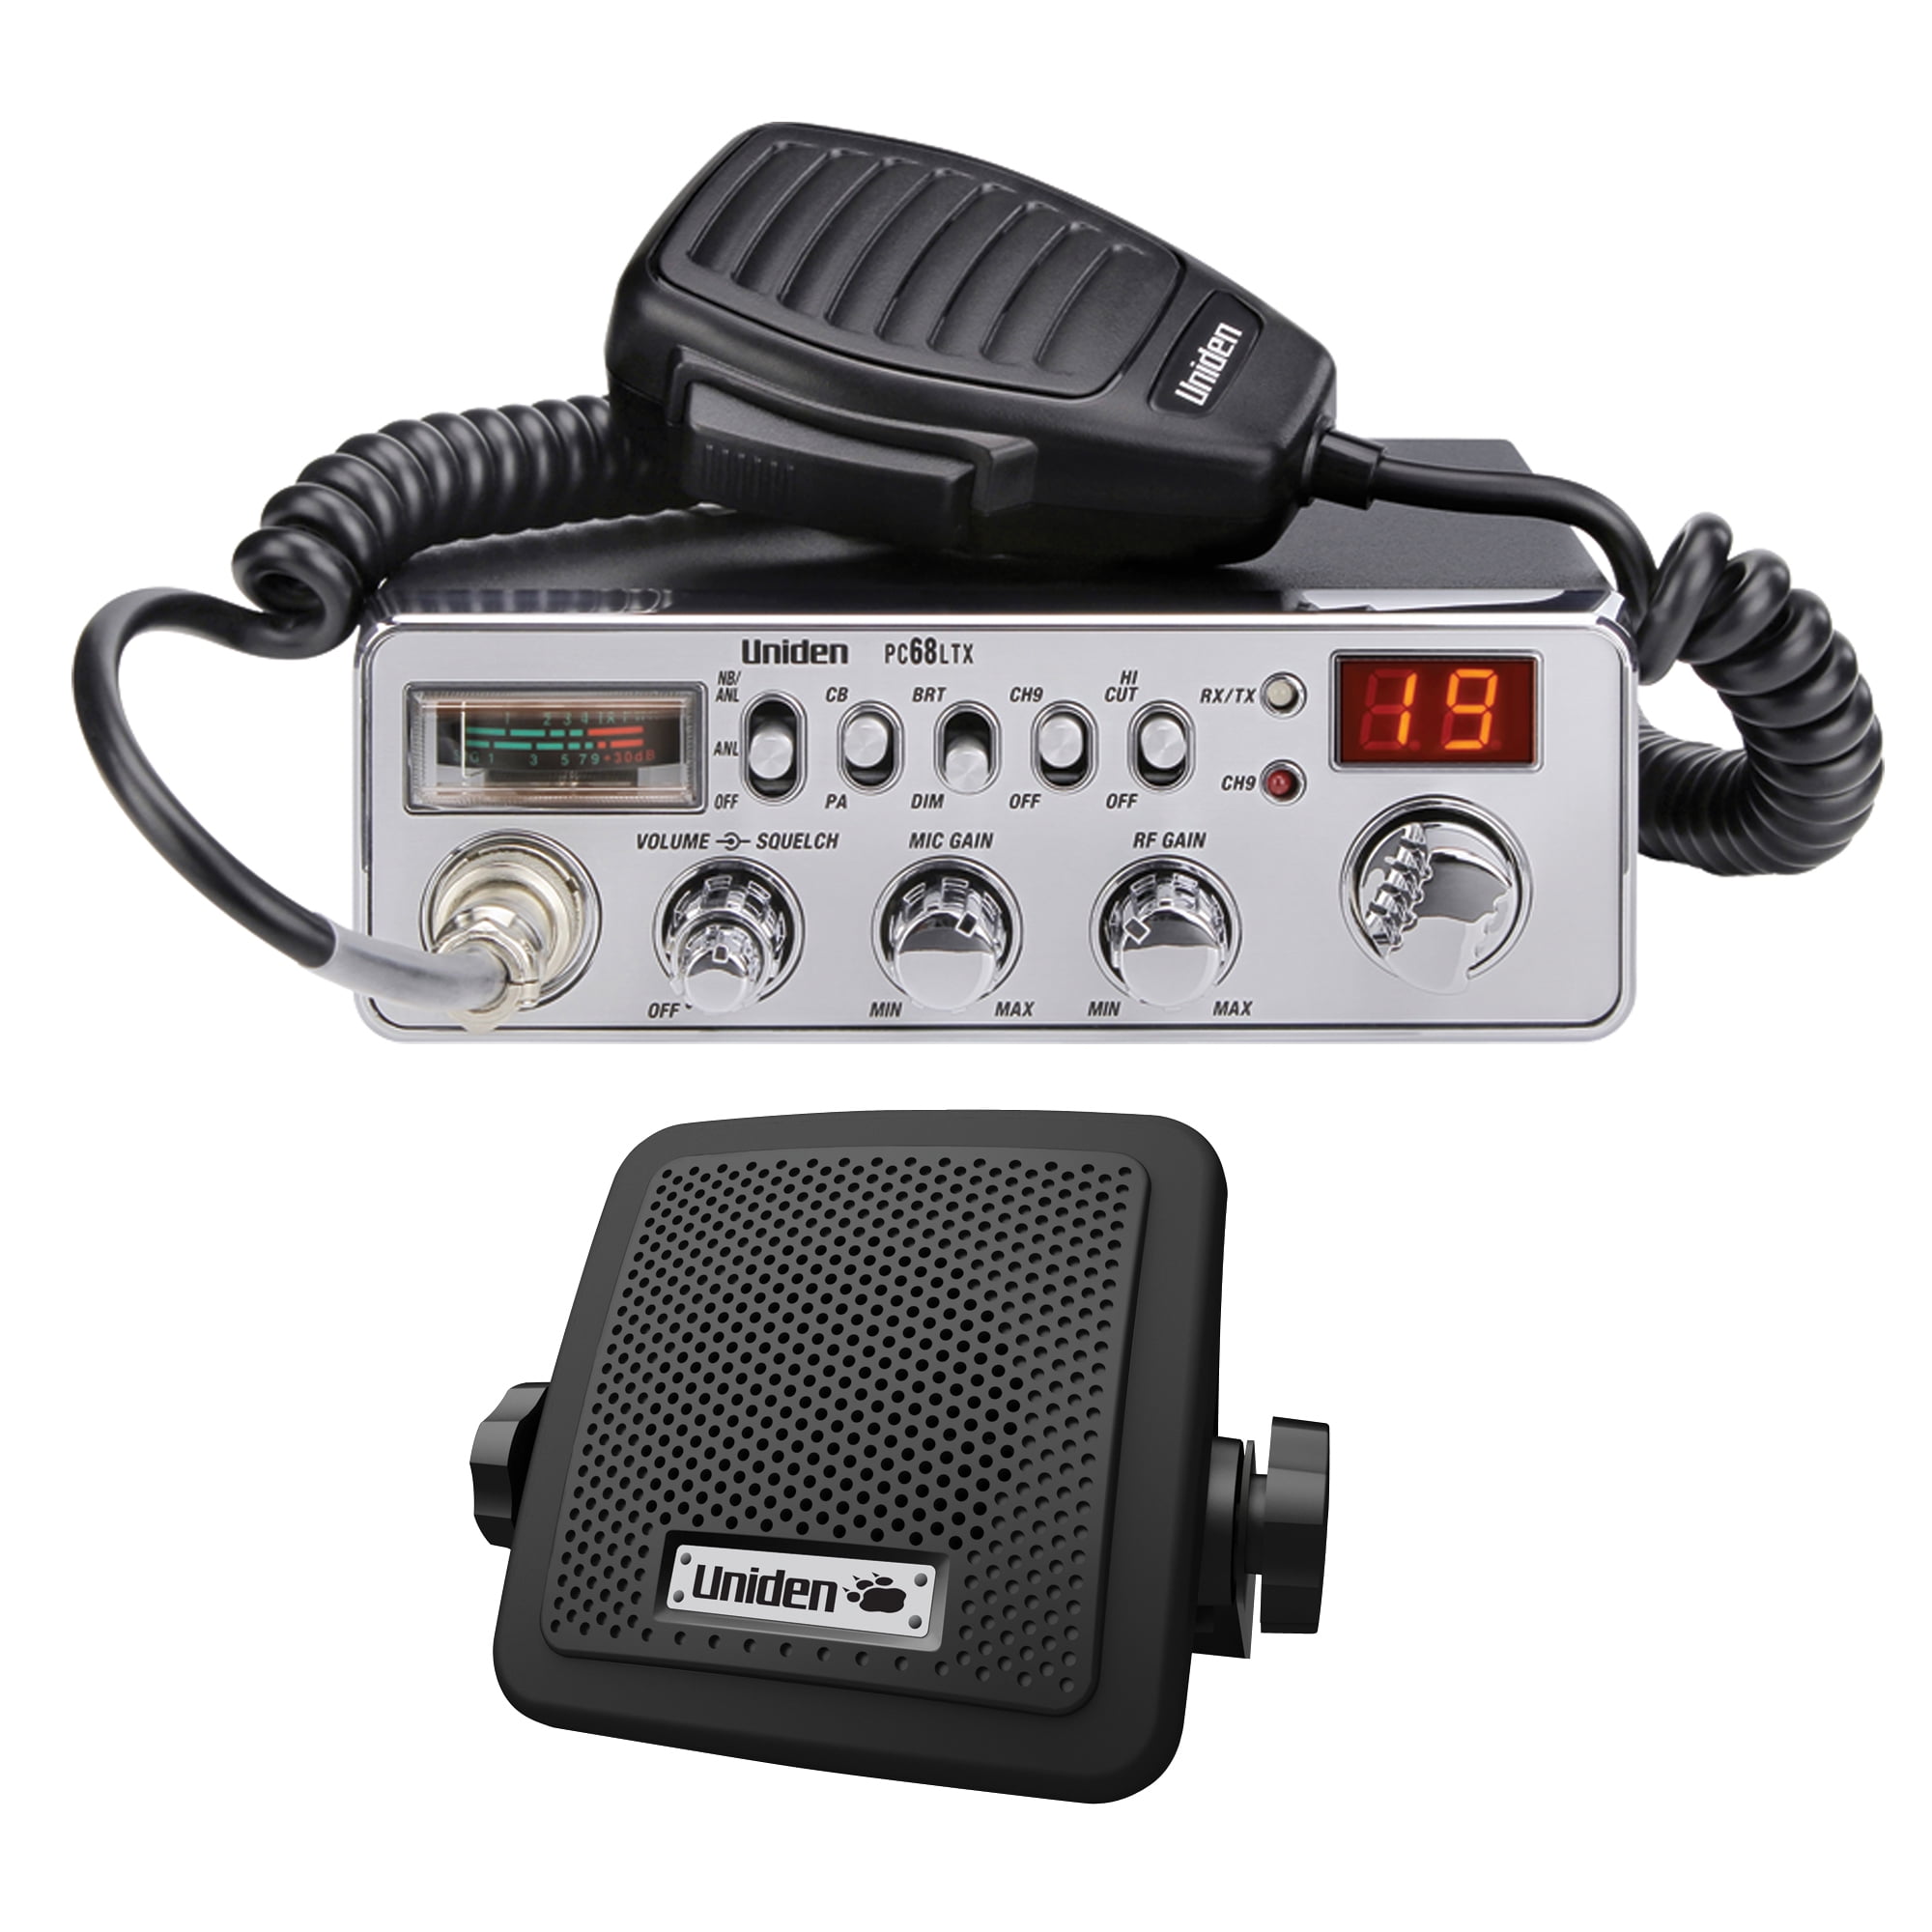 Automatic Noise Limiter Uniden PC68LTX 40-Channel CB Radio with PA/CB Switch Instant Channel 9 Mic Gain Control Analog S/RF Meter and Hi-Cut Switch RF Gain Control 